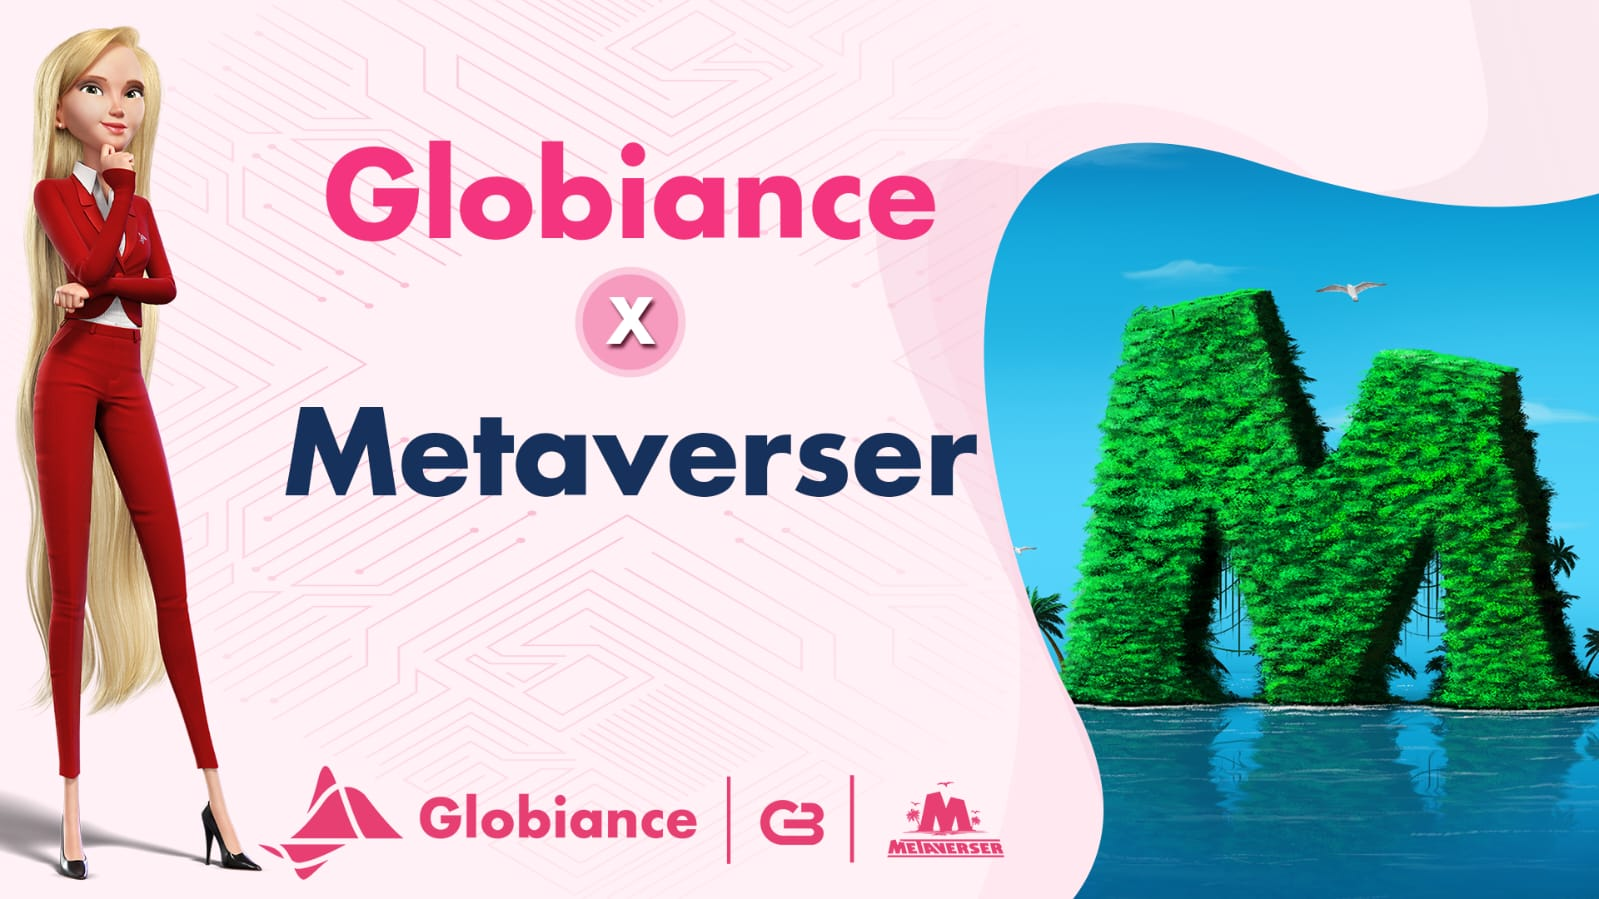 download the new for apple Metaverser